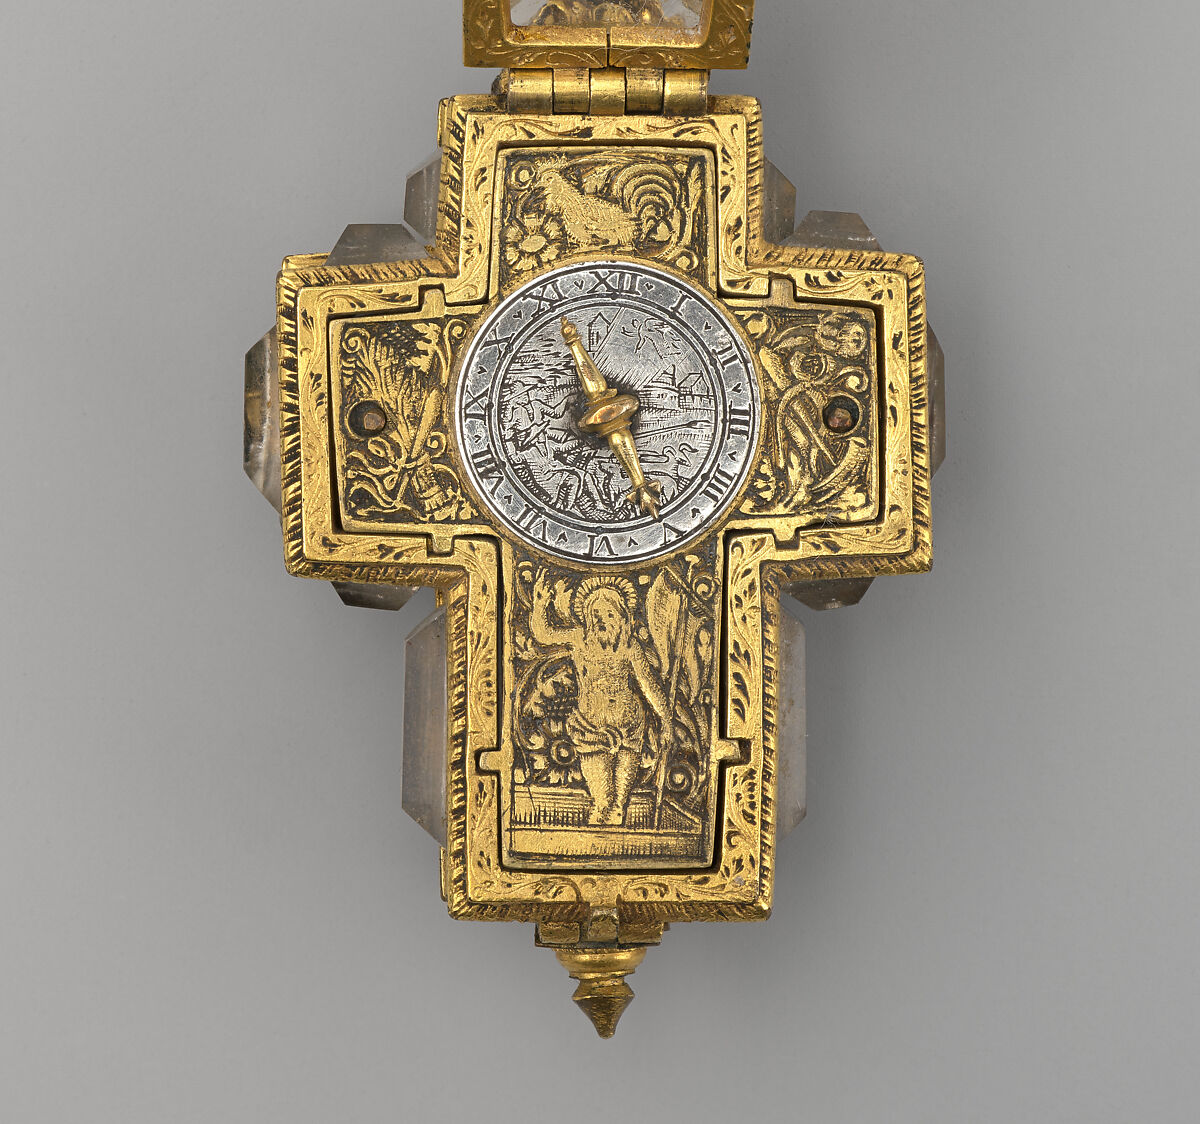 Watch, Watchmaker: Anthoine Arlaud (born ca. 1590, after 1641), Case: rock crystal, with gilded silver mounts; Dial: silver, partly gilded; Movement: gilded brass and steel, Swiss, Geneva 